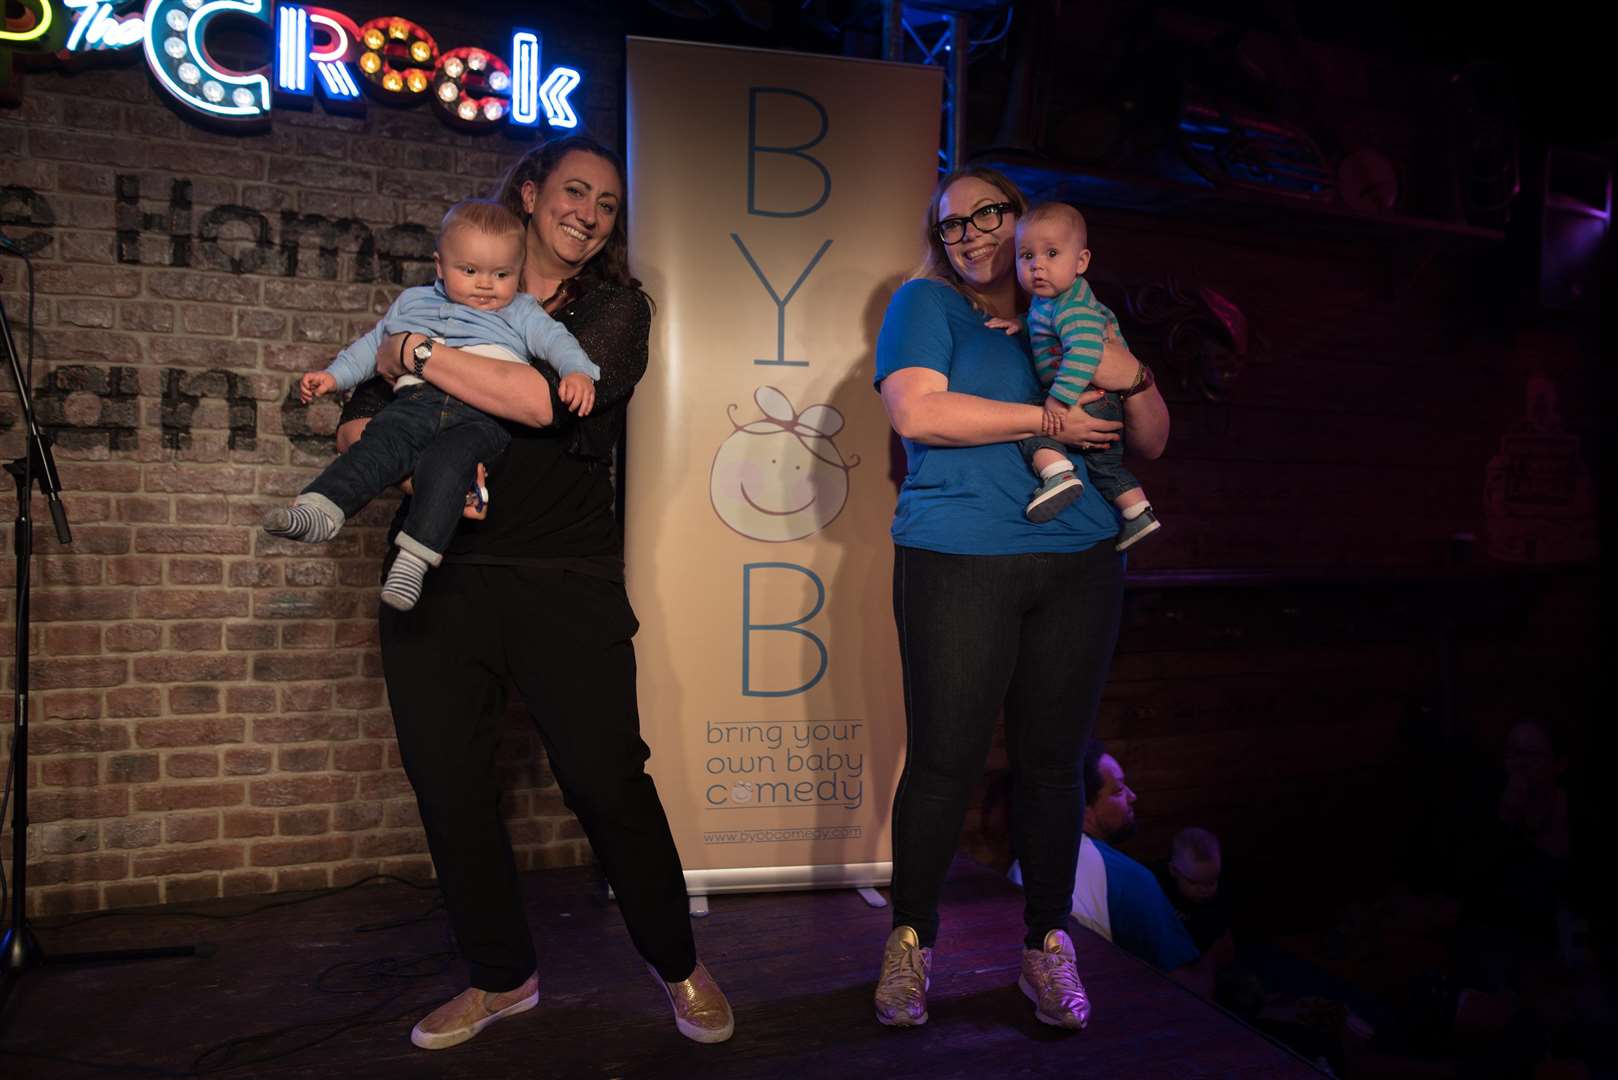 Bring Your Own Baby Comedy with Alyssa Kyria and Carly Smallman is coming to Dartford